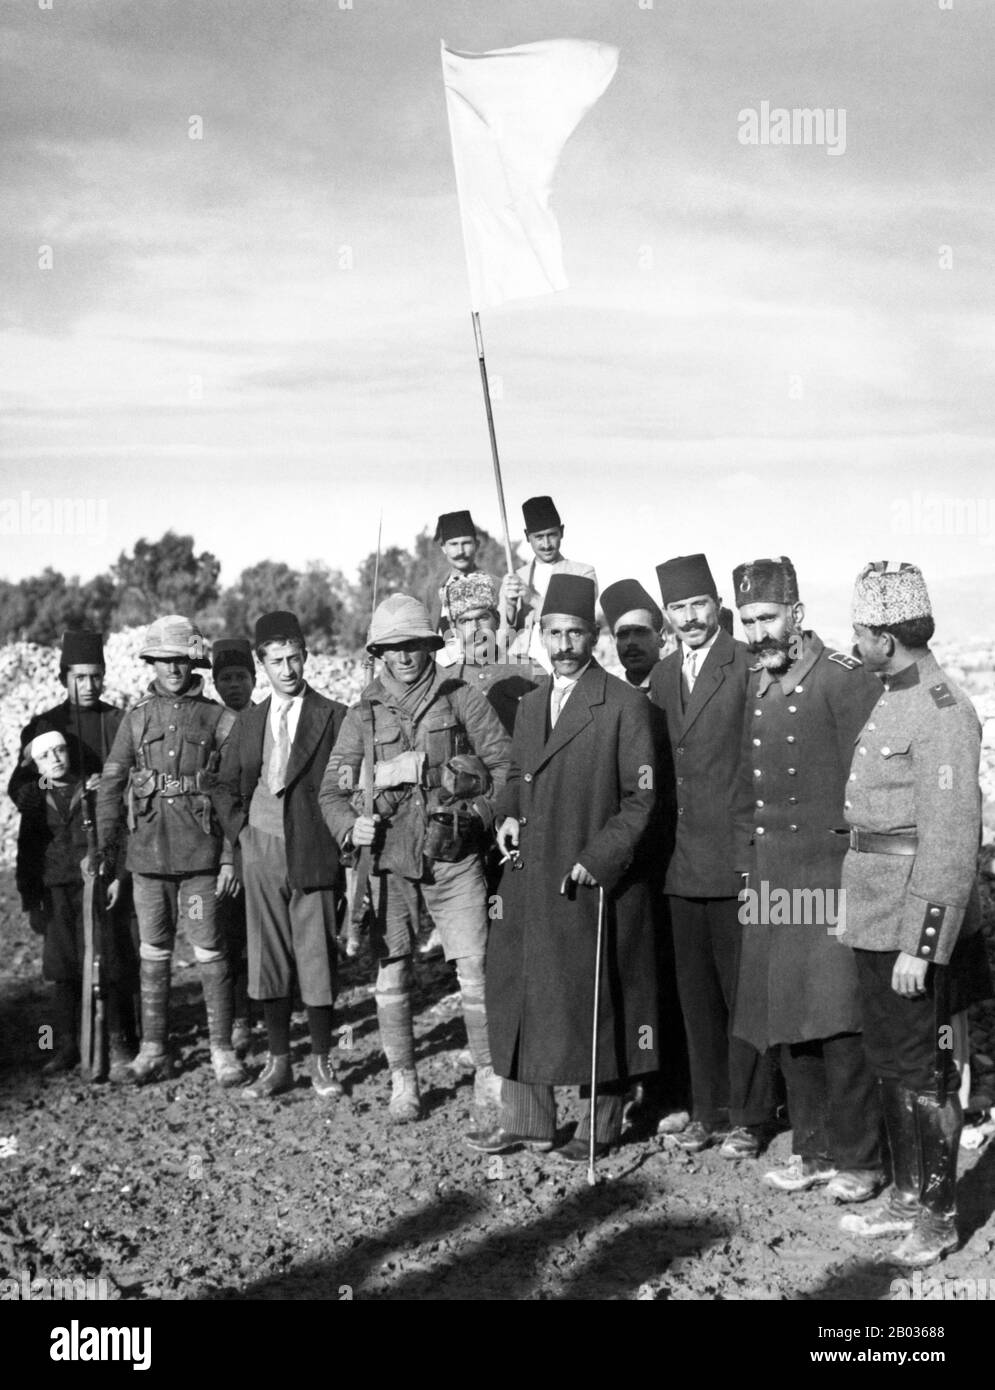 The Ottoman Mayor of Jerusalem, Hussein Effendi el Husseini (al-Husseini), meeting with Sergeants Sedgwick and Hurcomb of the 2/19th Battalion, London Regiment, under the white flag of surrender, at 8 am, 9 December, 1917. Stock Photo